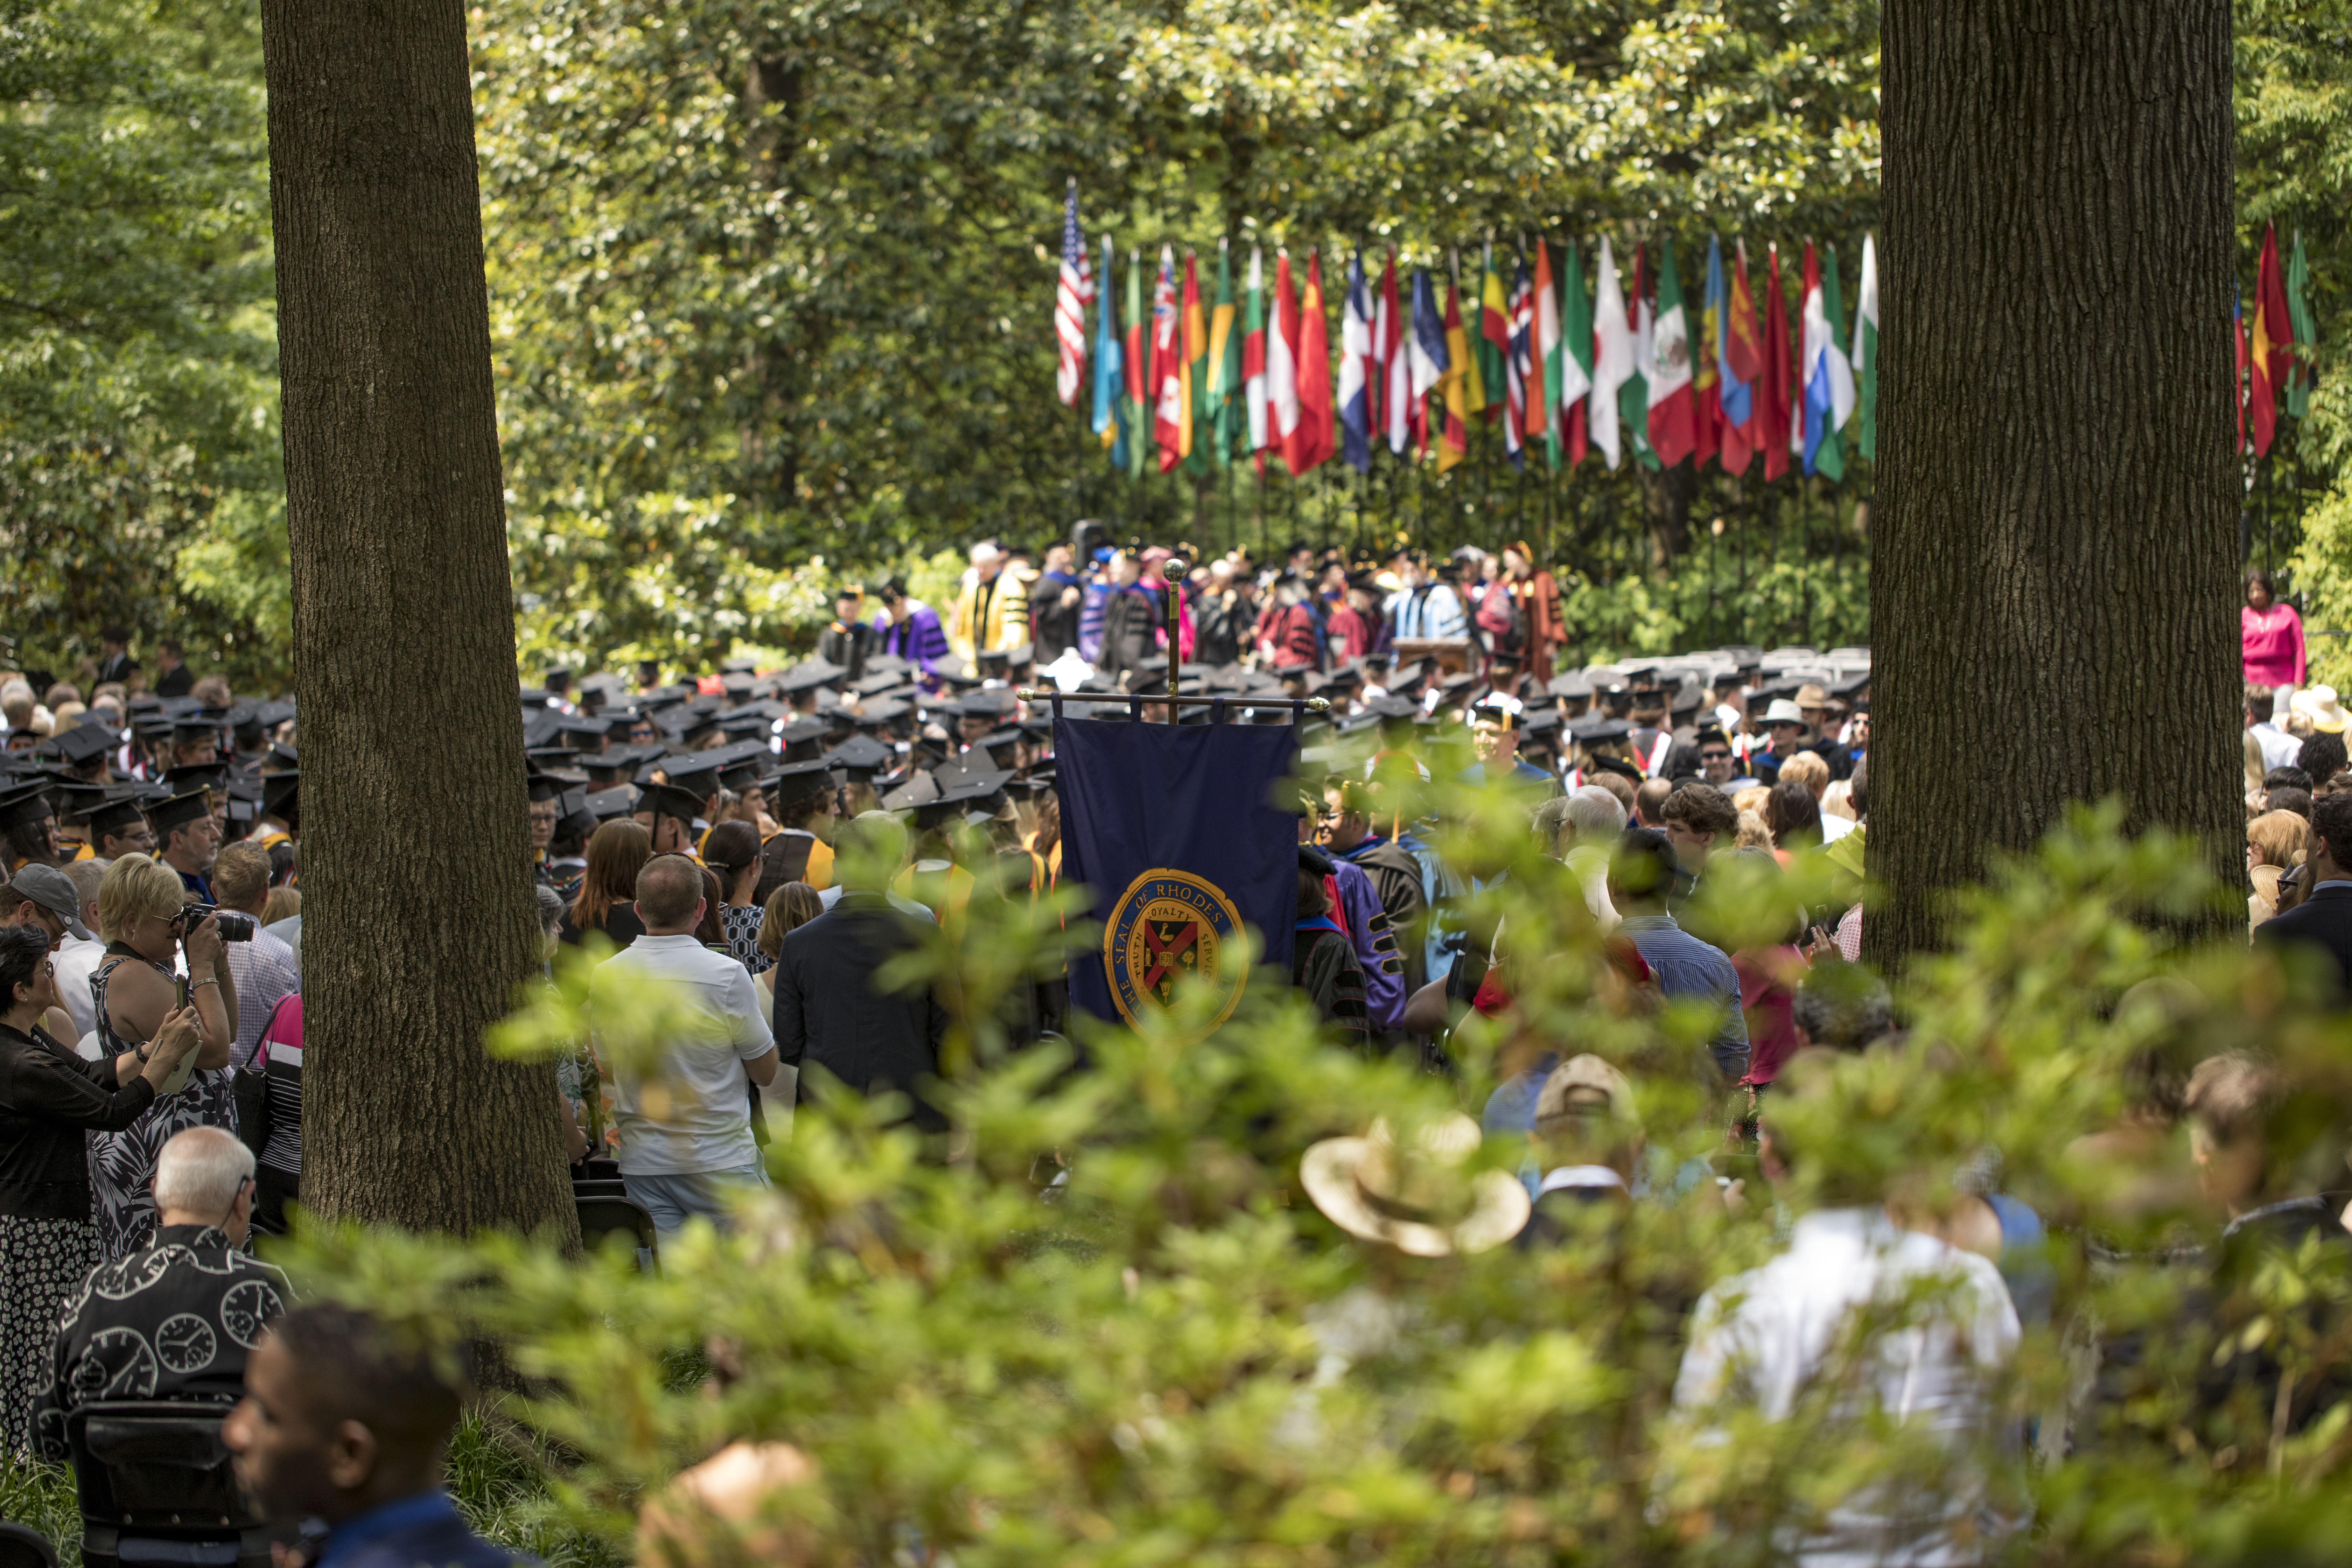 Crowd of graduates and families standing in front of a stage in a wooded area.